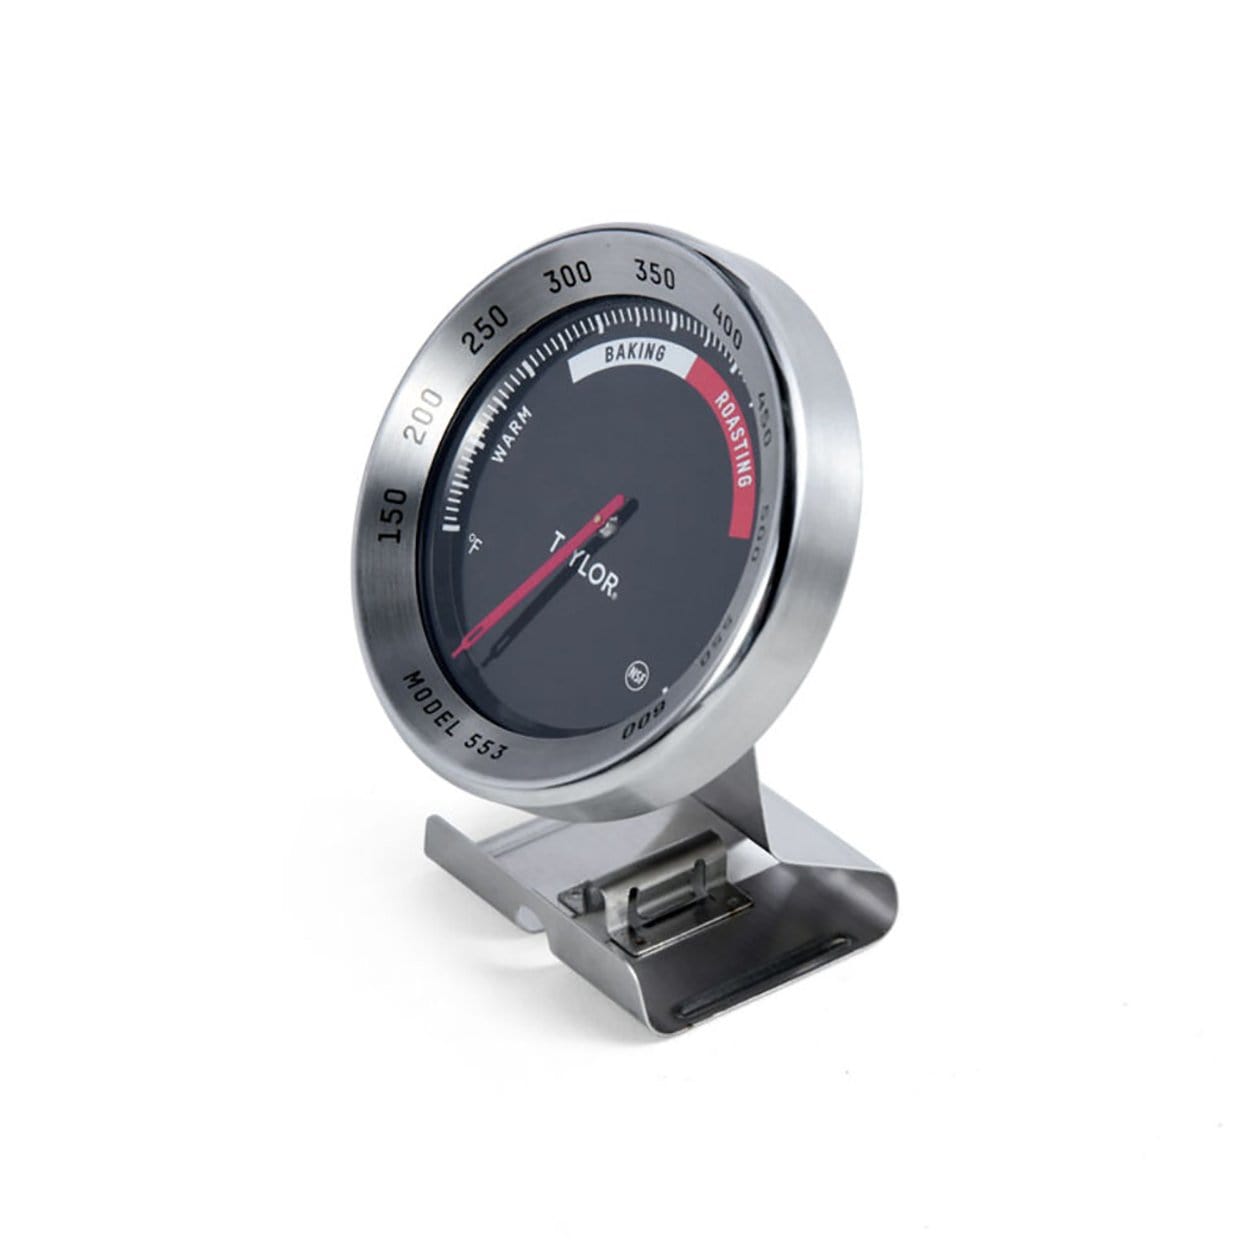 Analog Dial Oven Thermometer